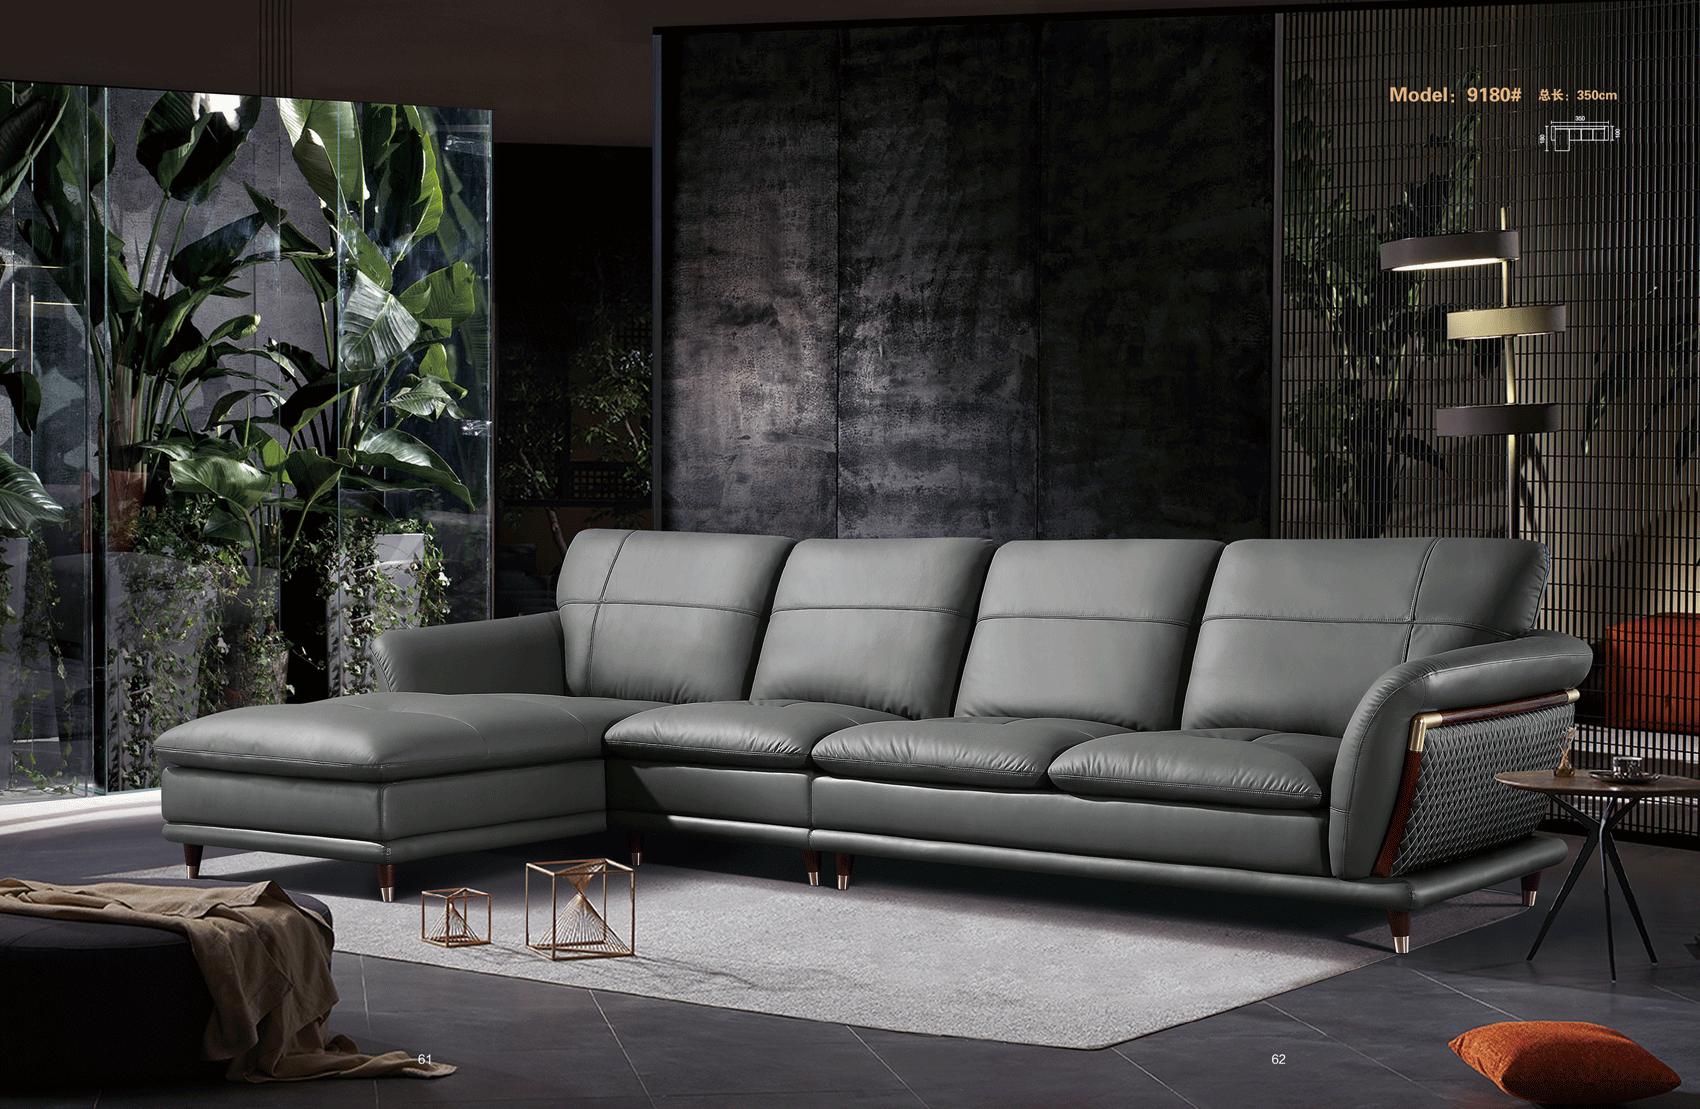   9180 Sectional  